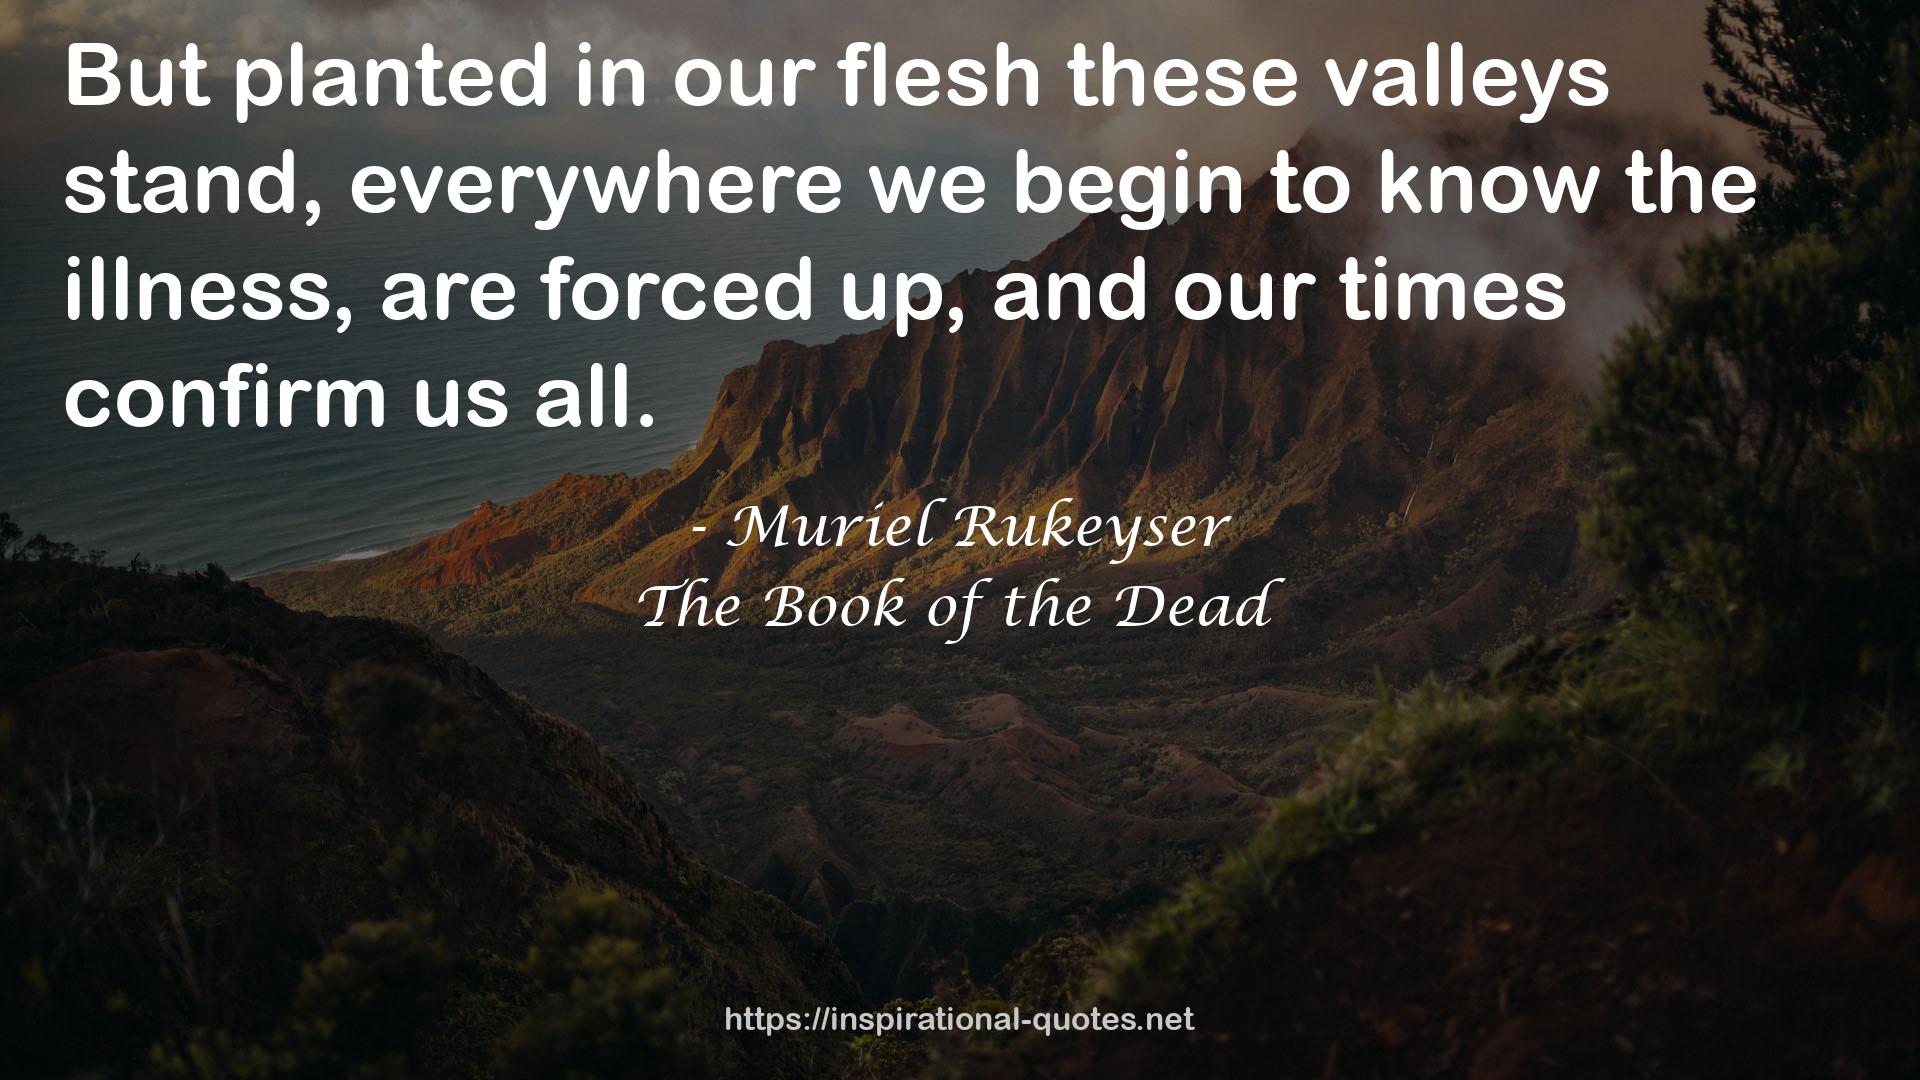 Muriel Rukeyser QUOTES